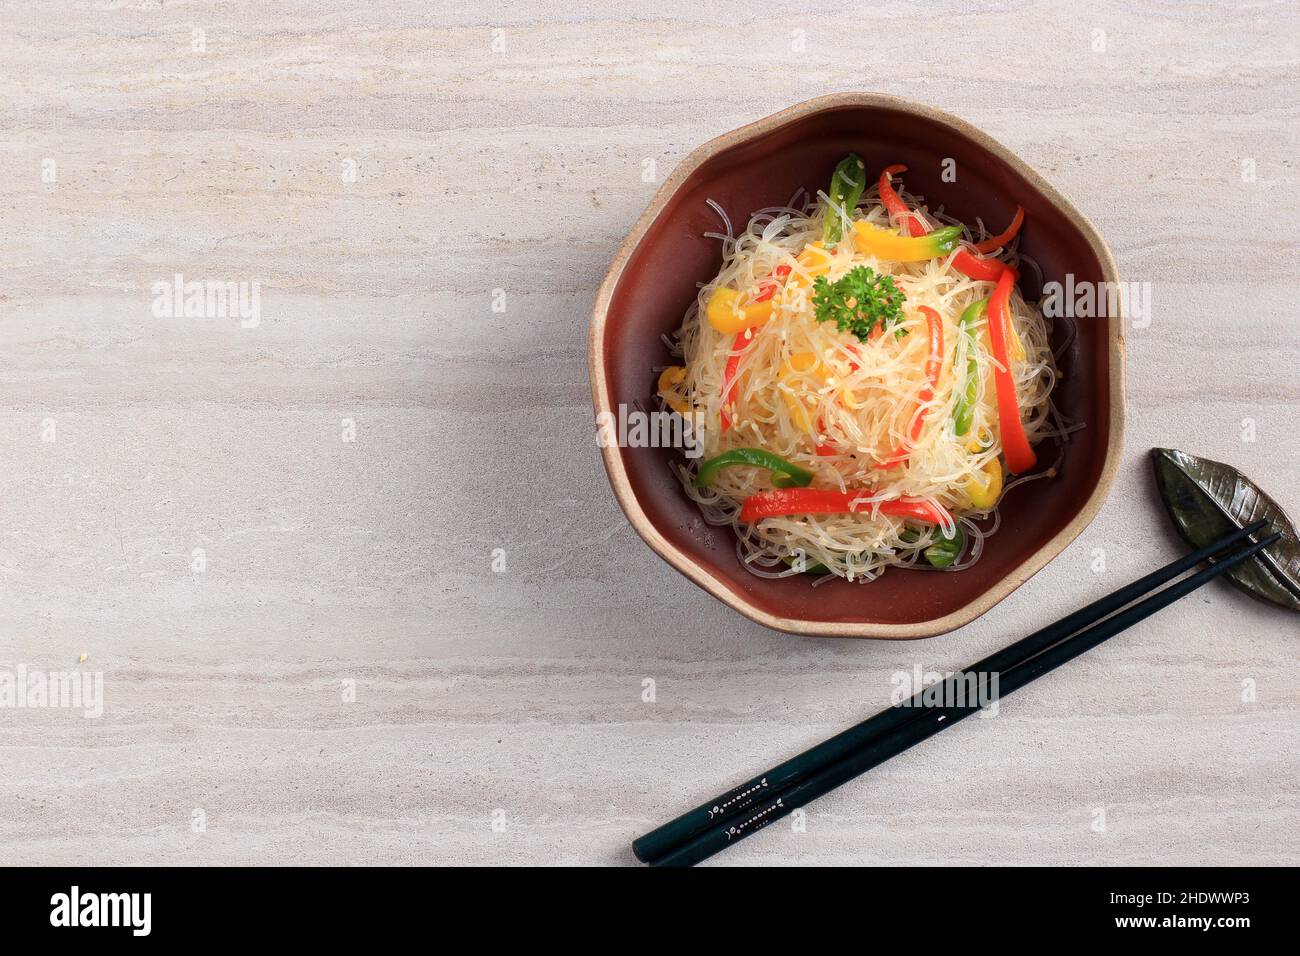 Korean Food, Japchae Vegetable and Beef Stir Fried, Top View with Copy Space for Text Stock Photo